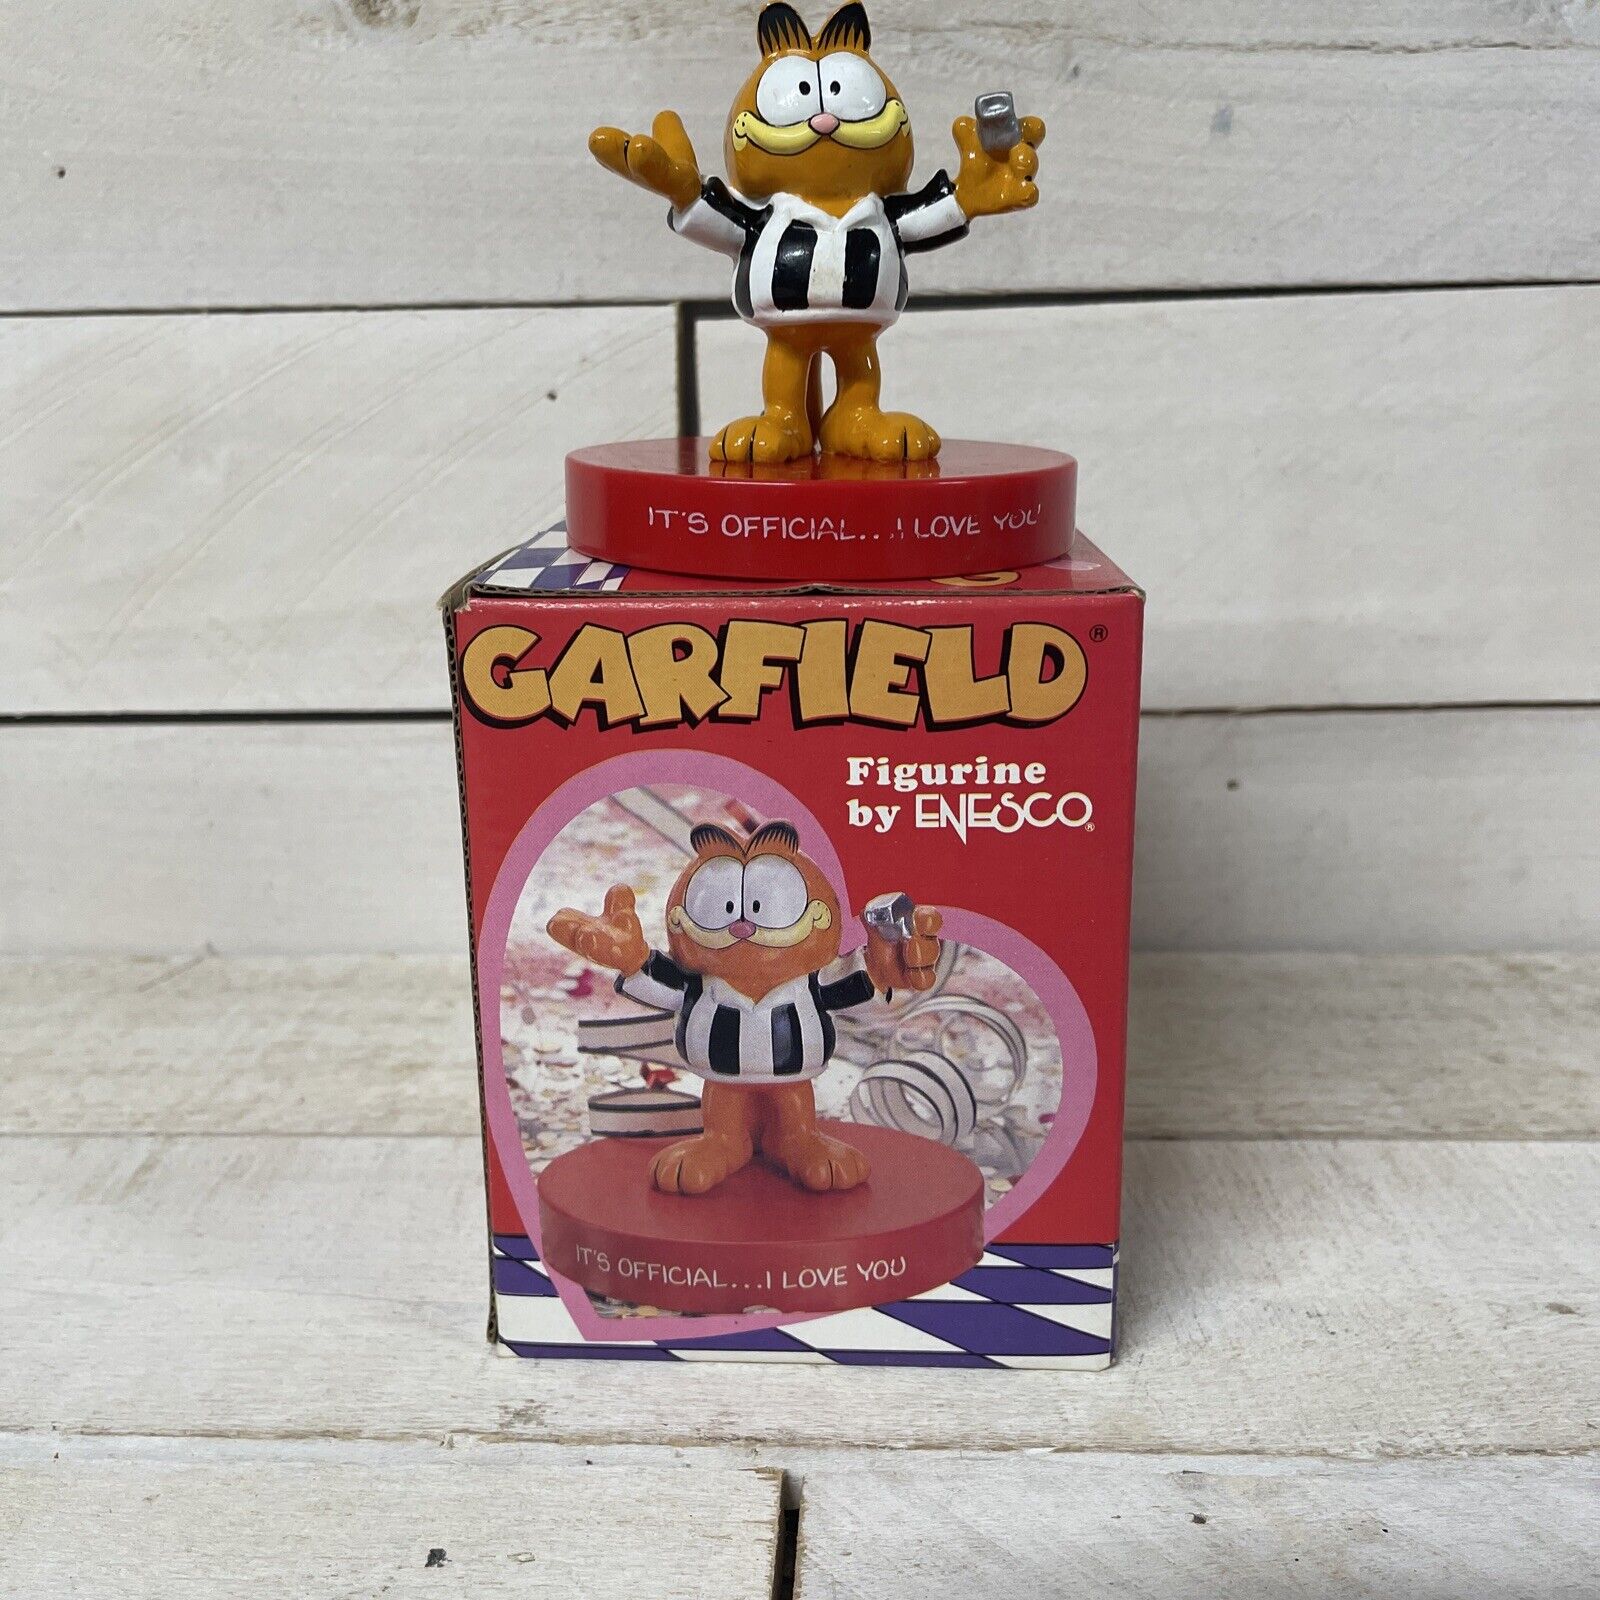 ENESCO Garfield Referee “it’s Official I Love You Figure”  1981 Vintage W/ Box